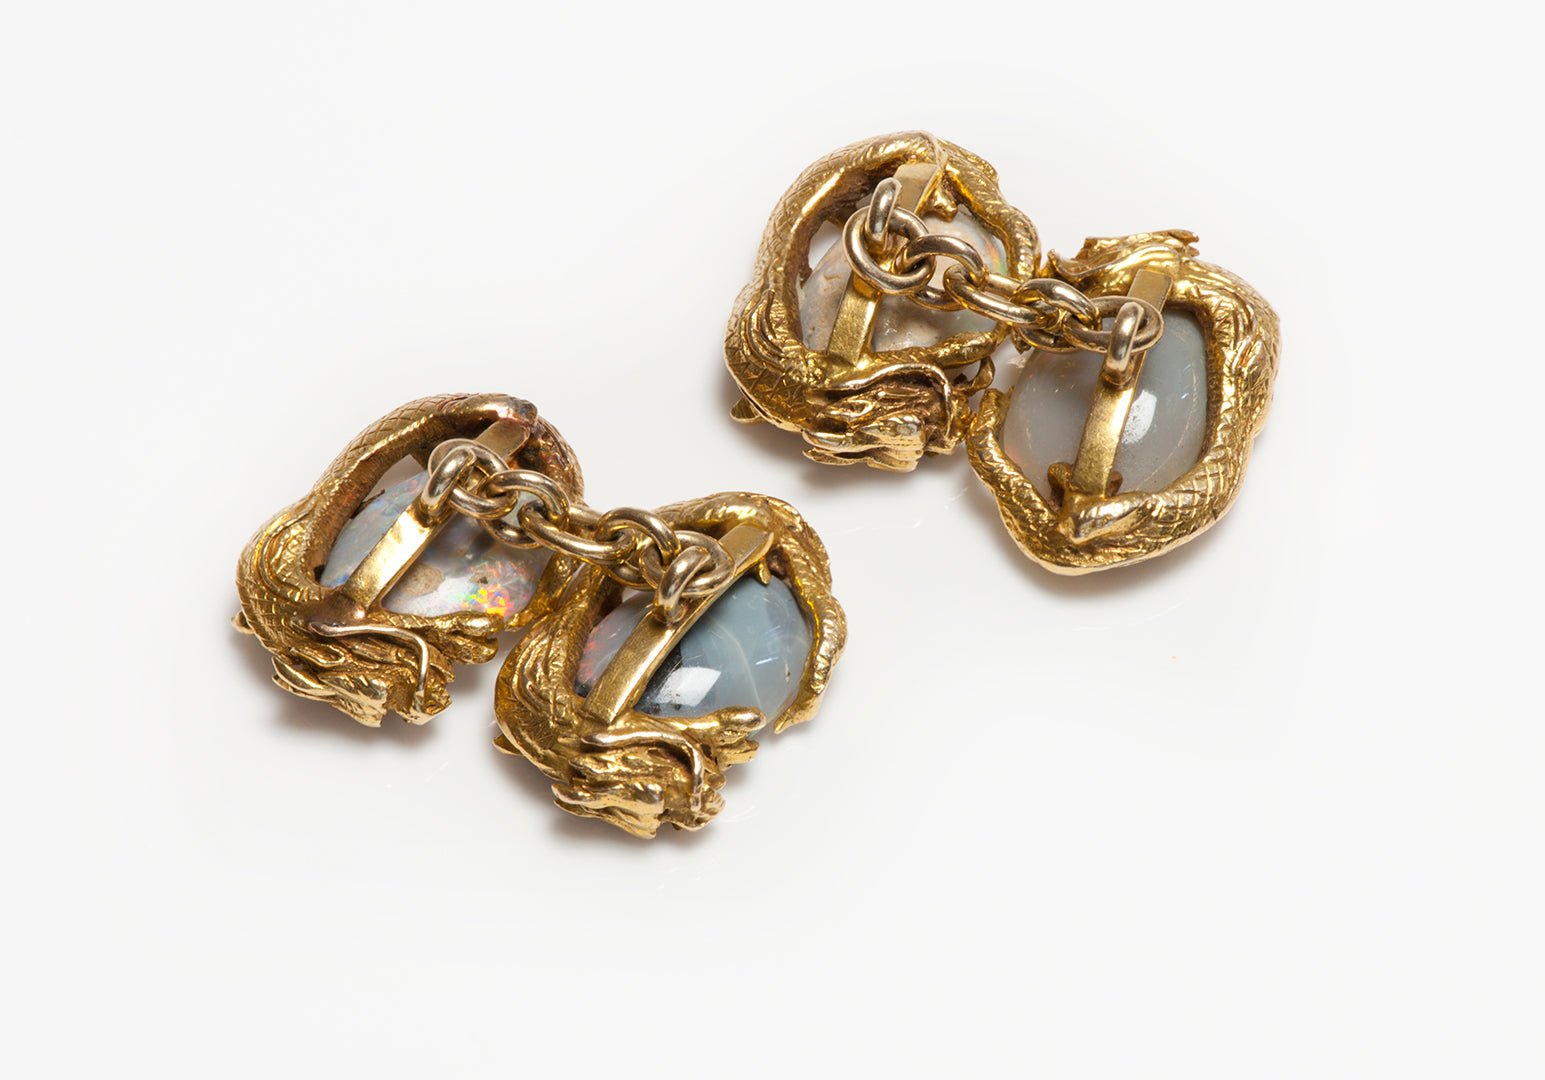 Antique Opal Gold Dragon Cufflinks - DSF Antique Jewelry